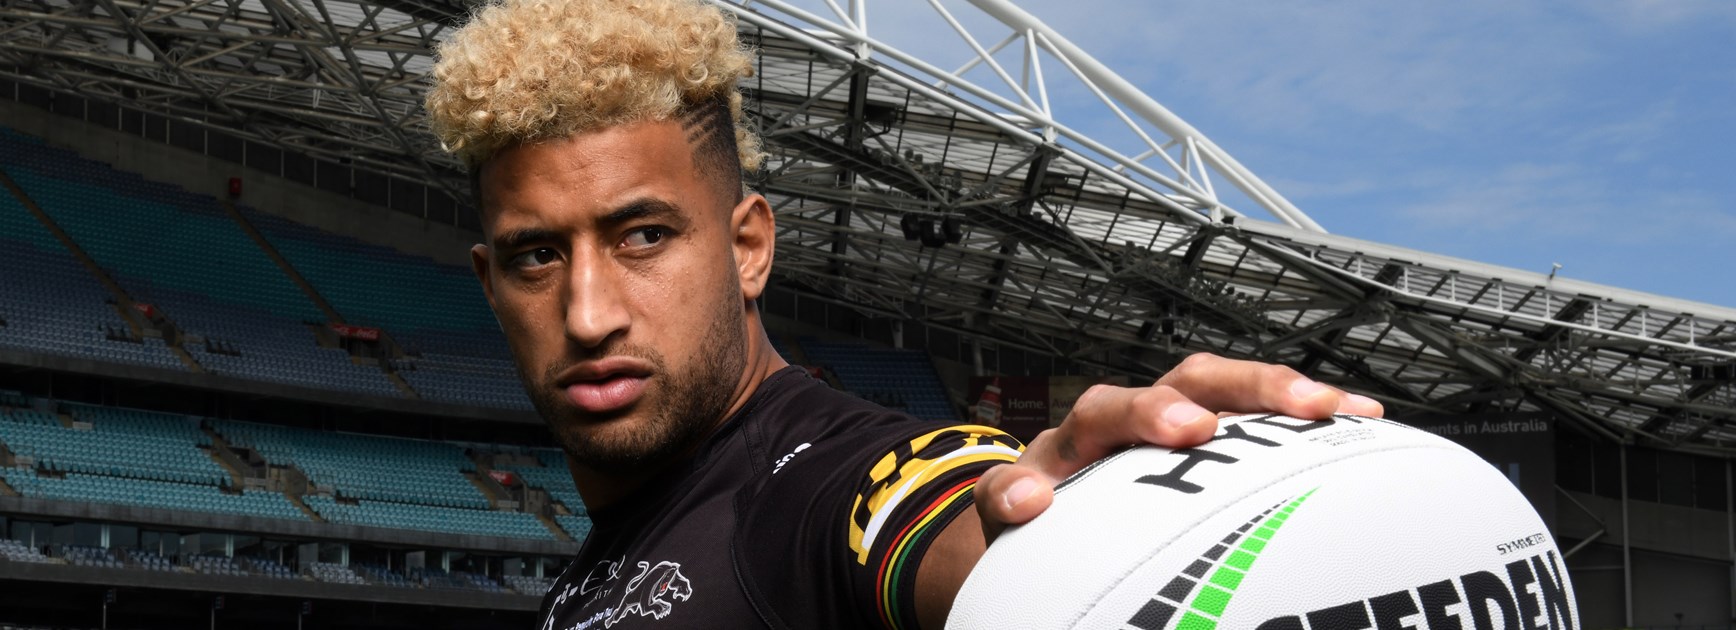 Accidental 'Fat Club' captaincy propels Kikau to career year